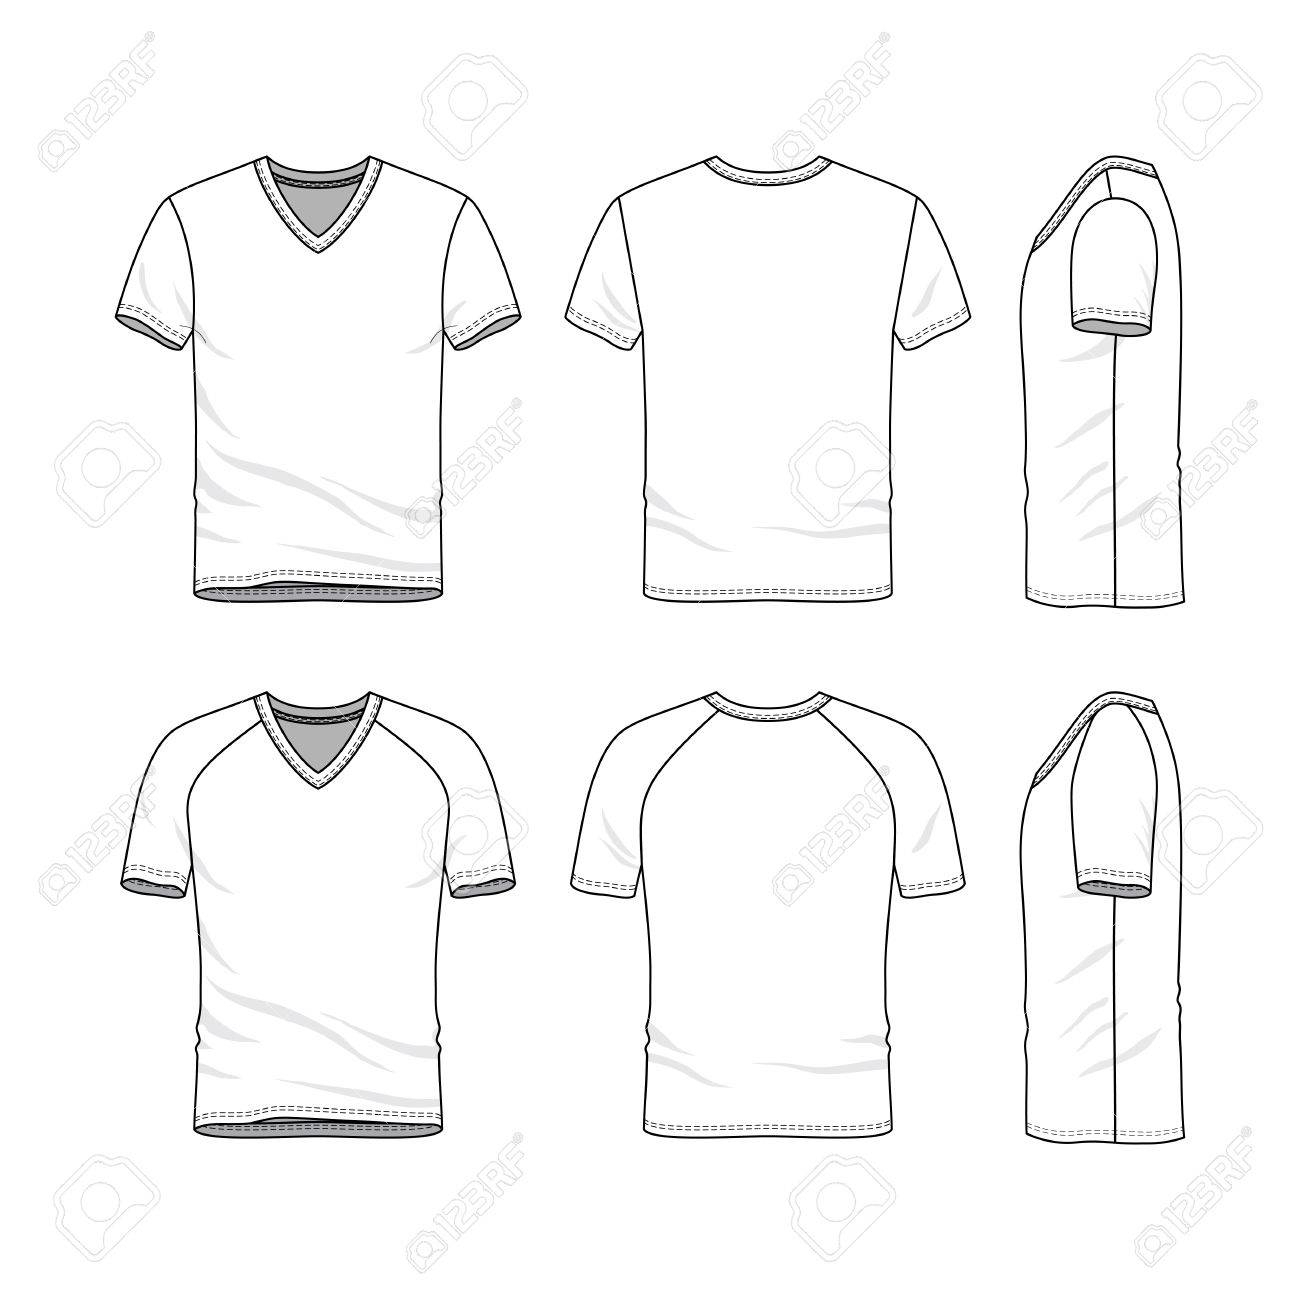 Stock Illustration With Blank V Neck T Shirt Template